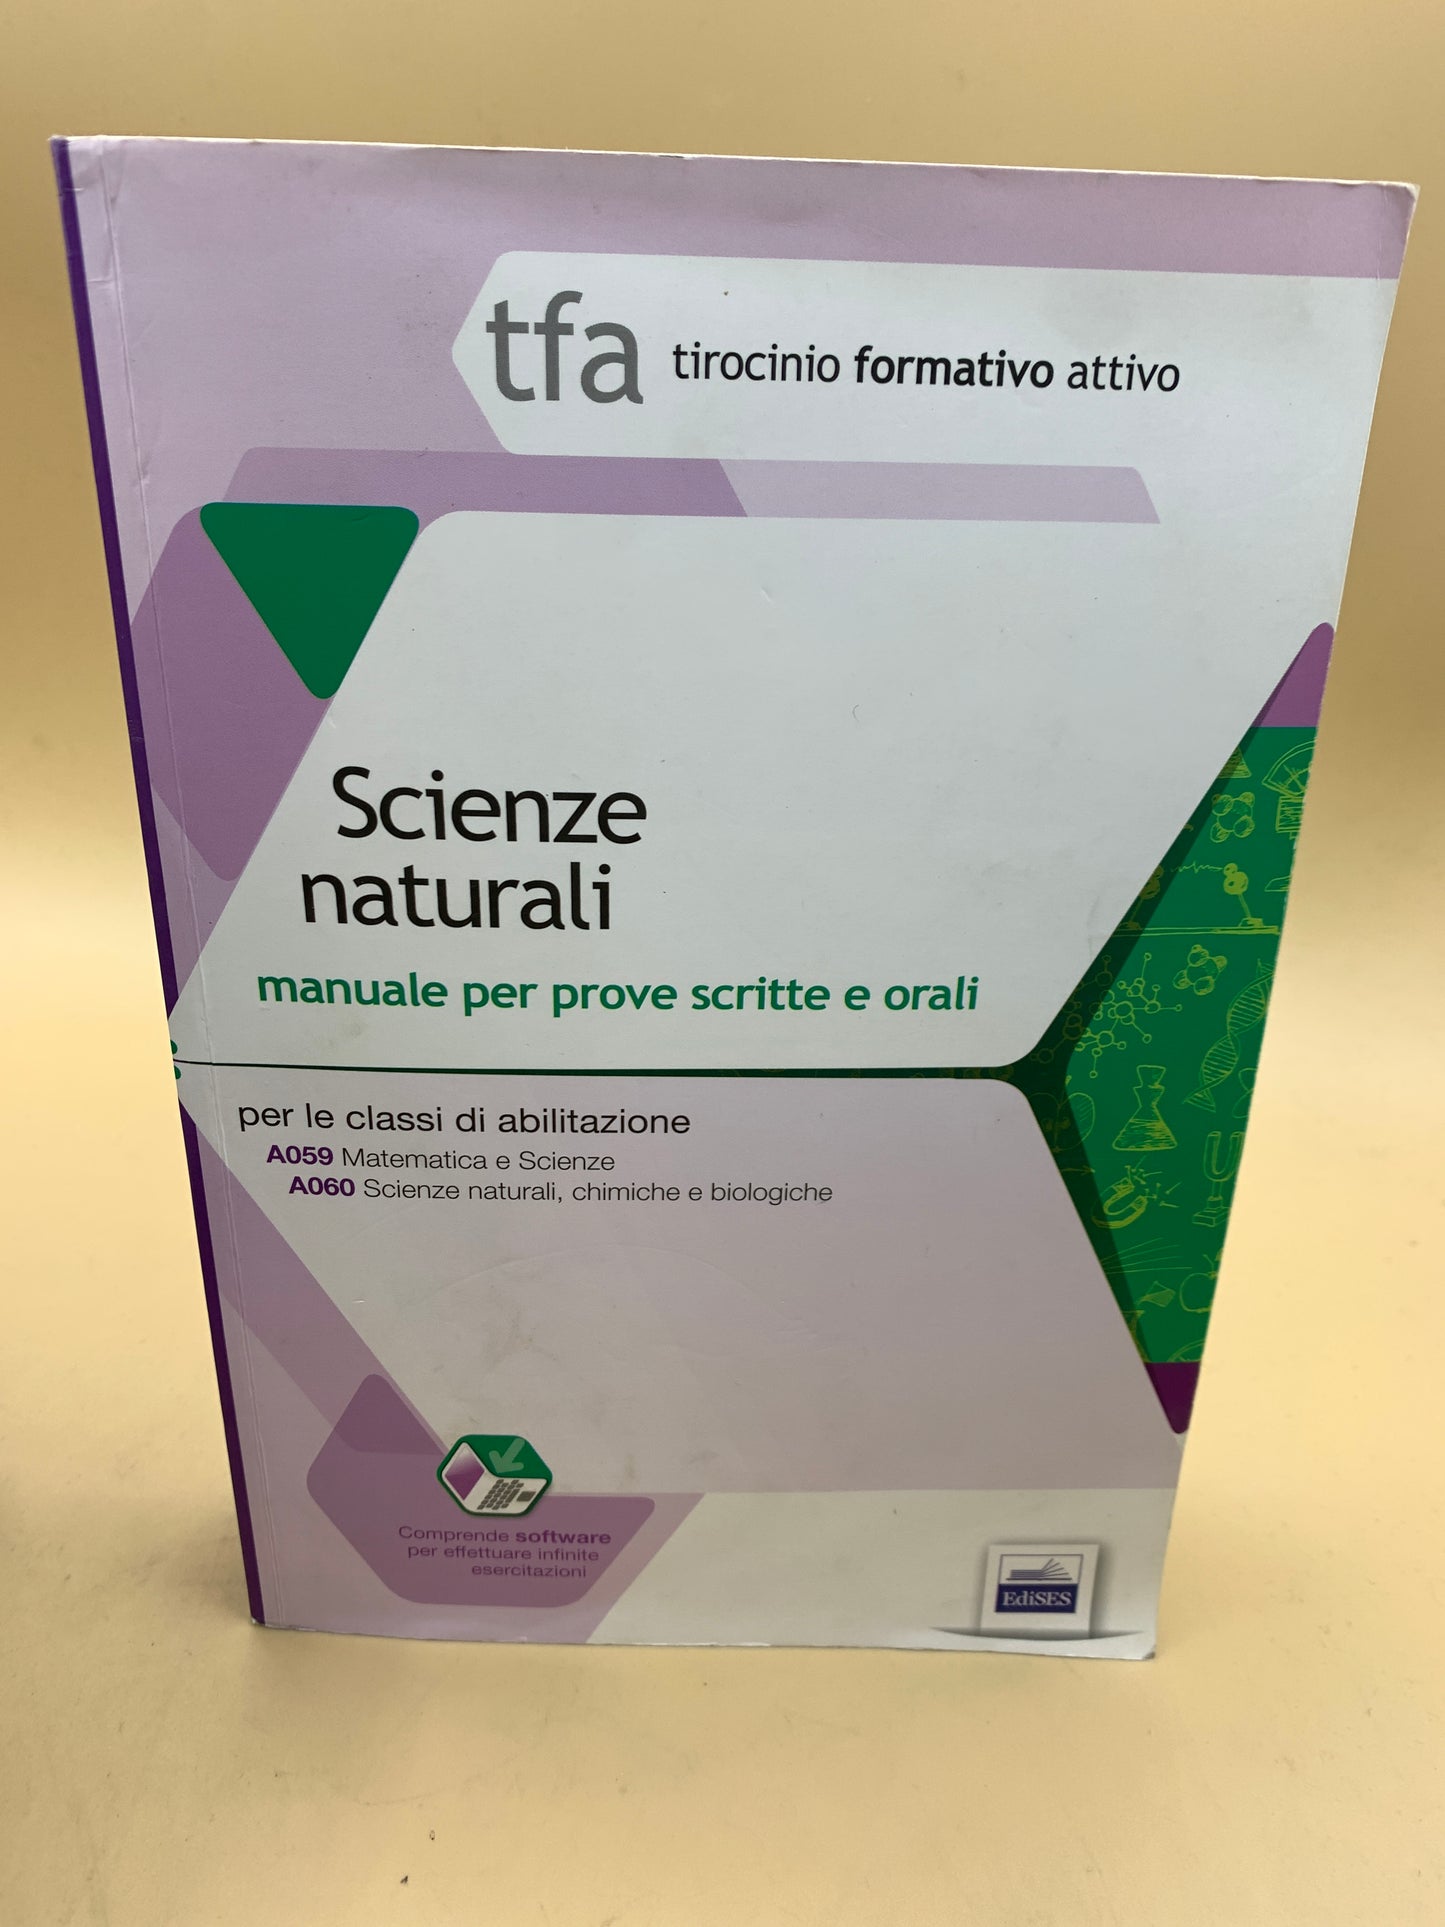 10 TFA. Natural Science. Manual for the written and oral tests of classes A059 and A060. With simulation software